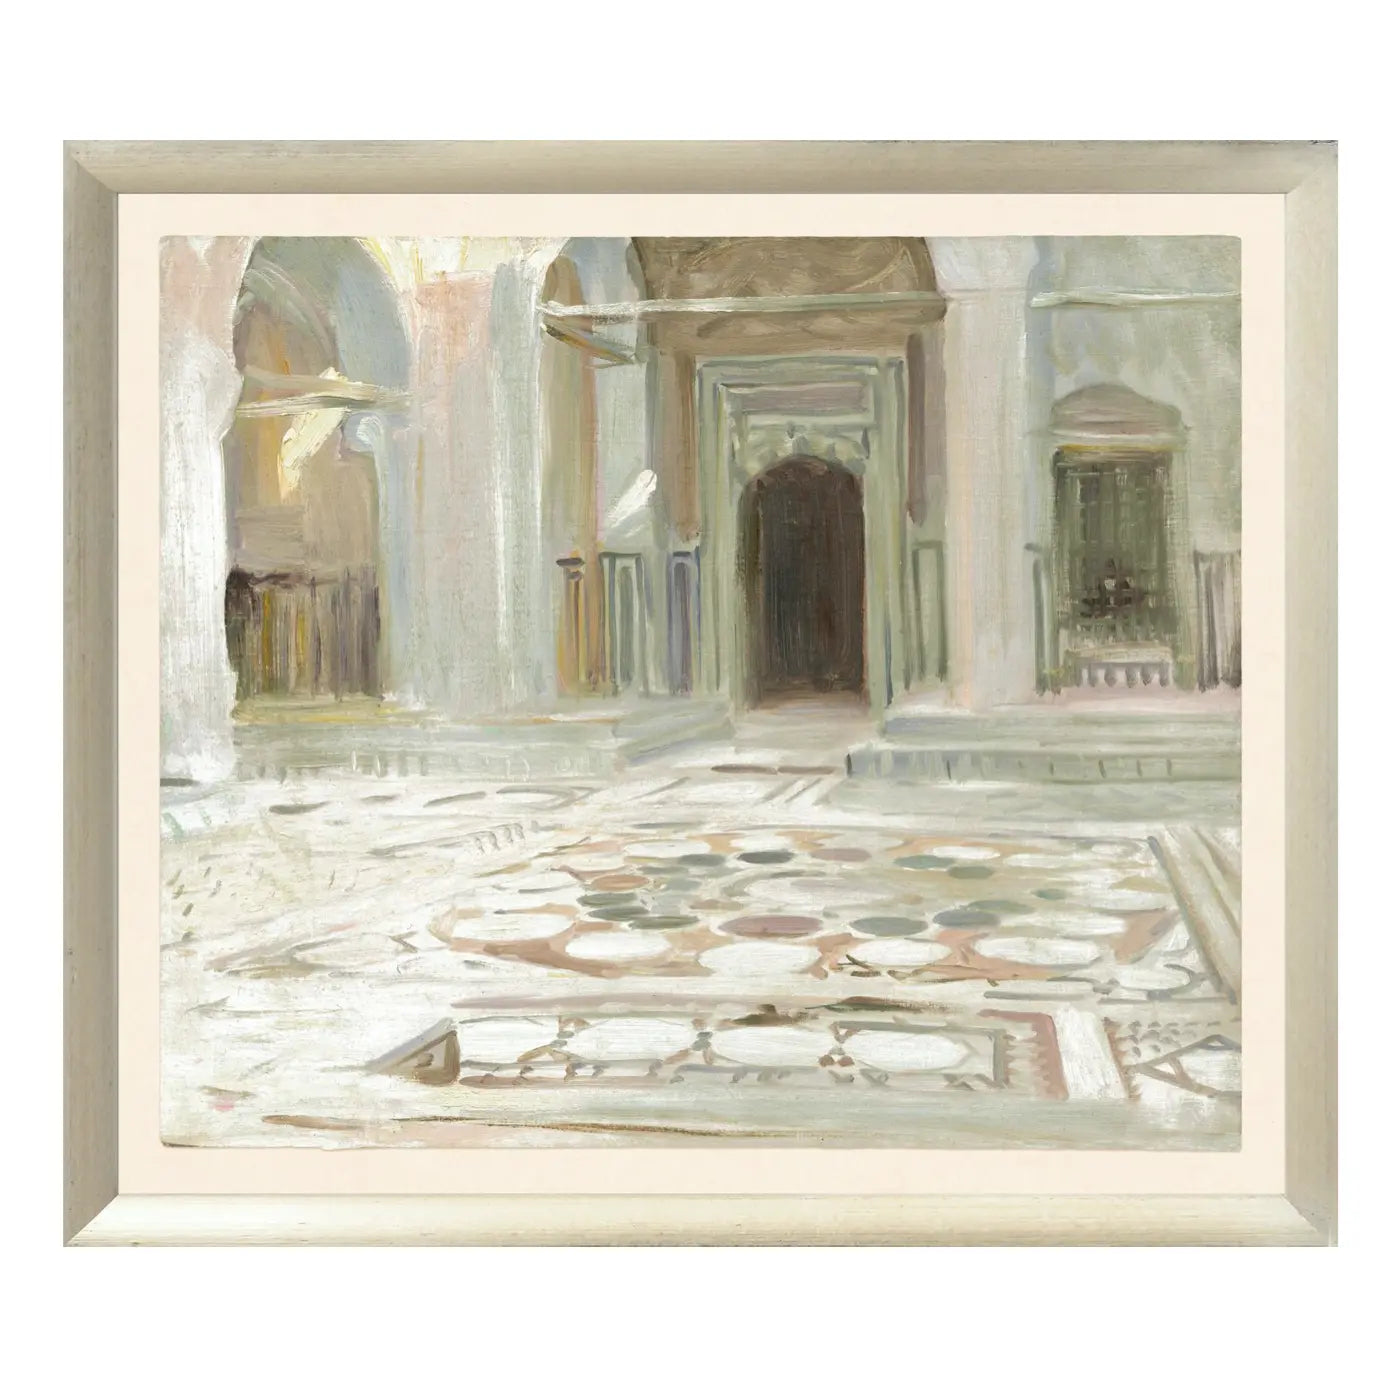 Cairo 1891 Framed Print from Collection 08 - Home Smith